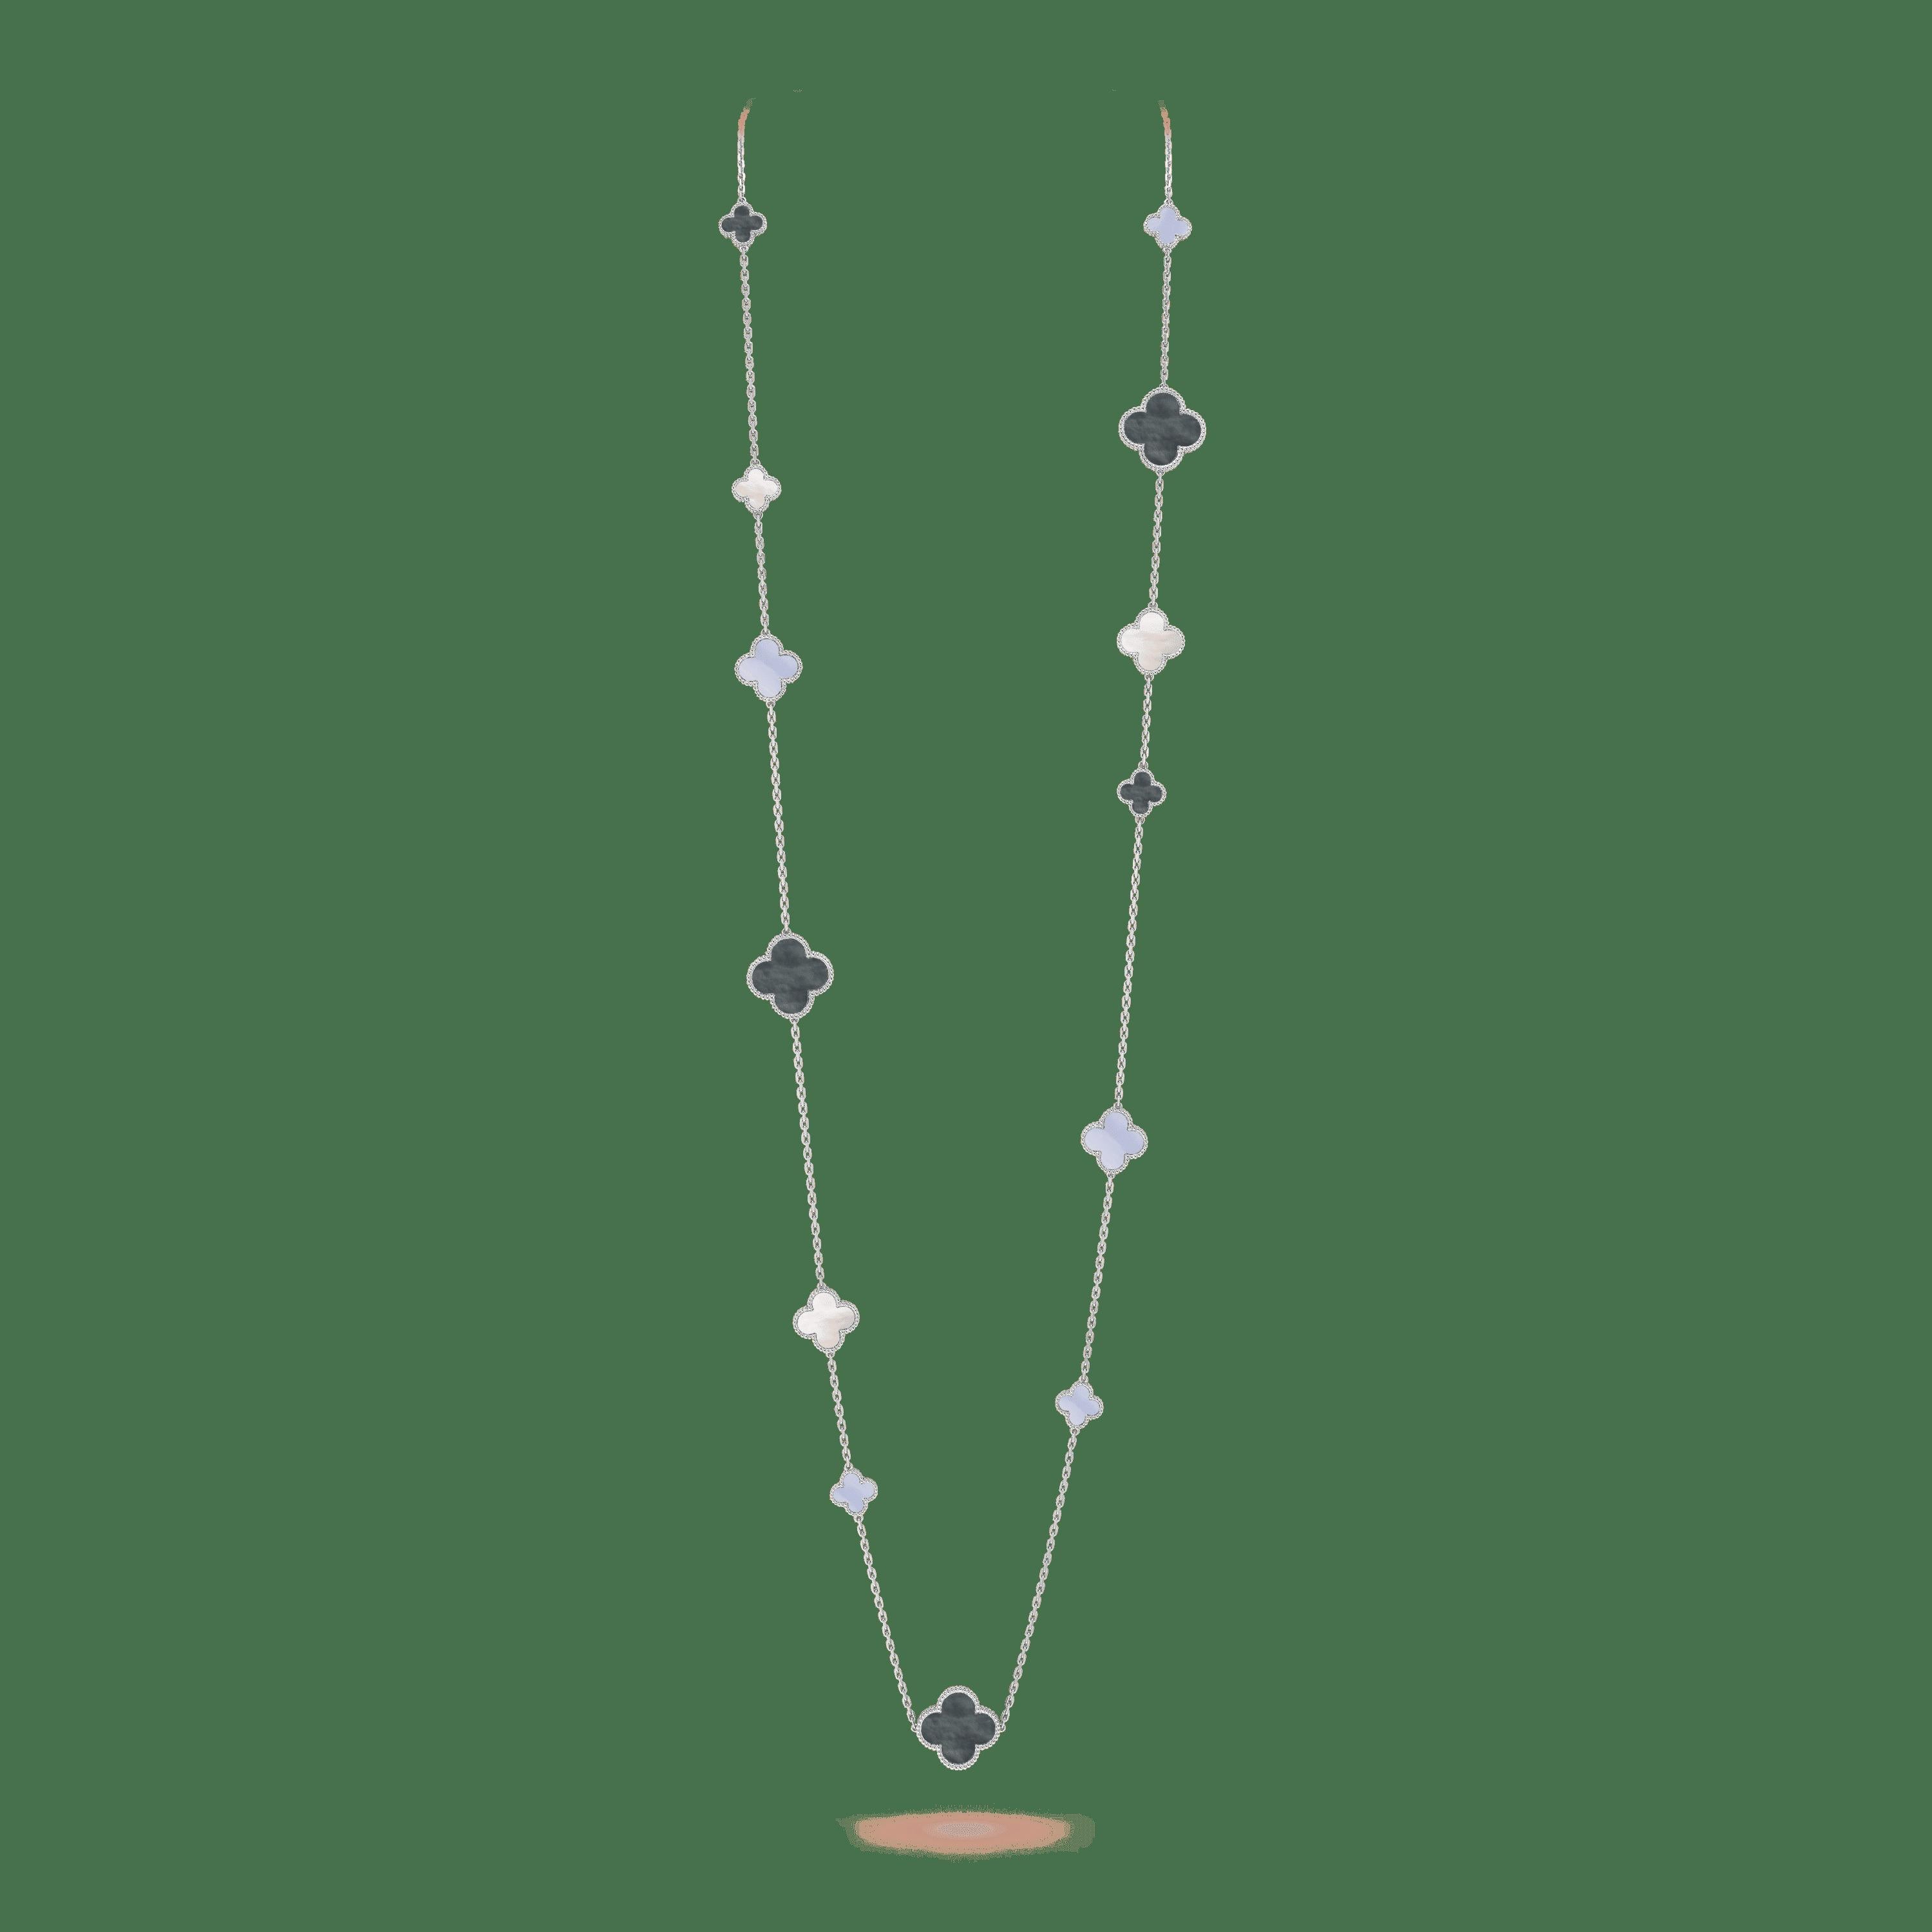 Magic Alhambra long Necklace, 16 motifs, white gold, white and grey mother-of-pearl, chalcedony. 
Chalcedony: 5 stones
Mother of Pearl : 11 stones